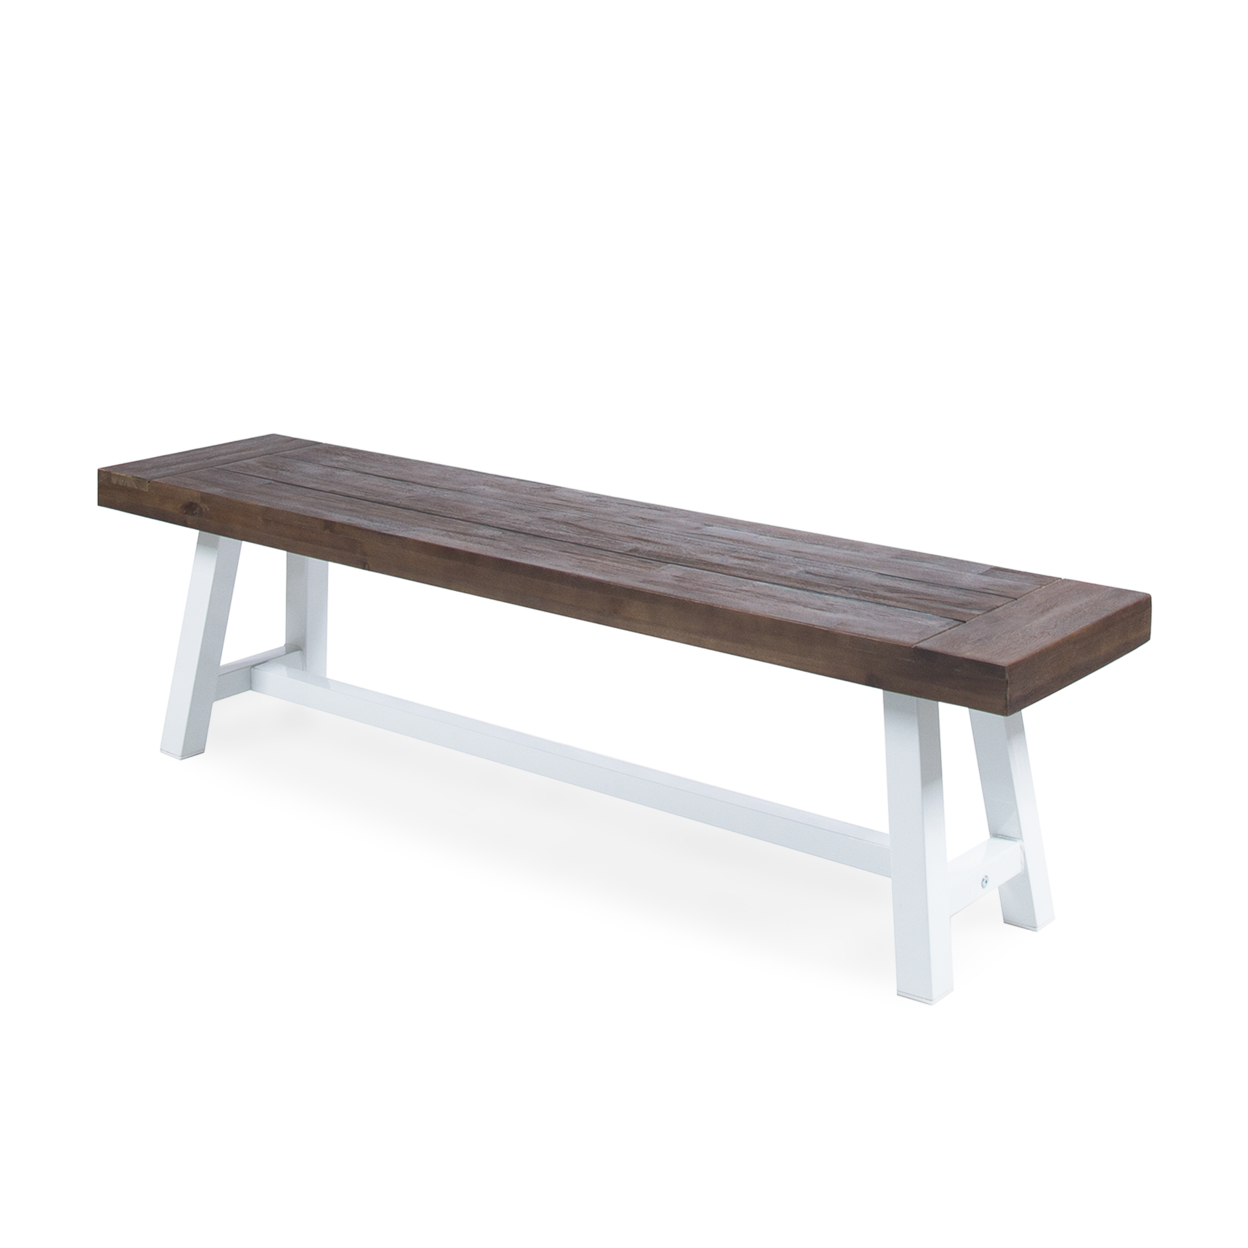 Angelina Indoor Farmhouse Acacia Wood Dining Bench With Rustic Metal Finish Frame - Light Gray/Black